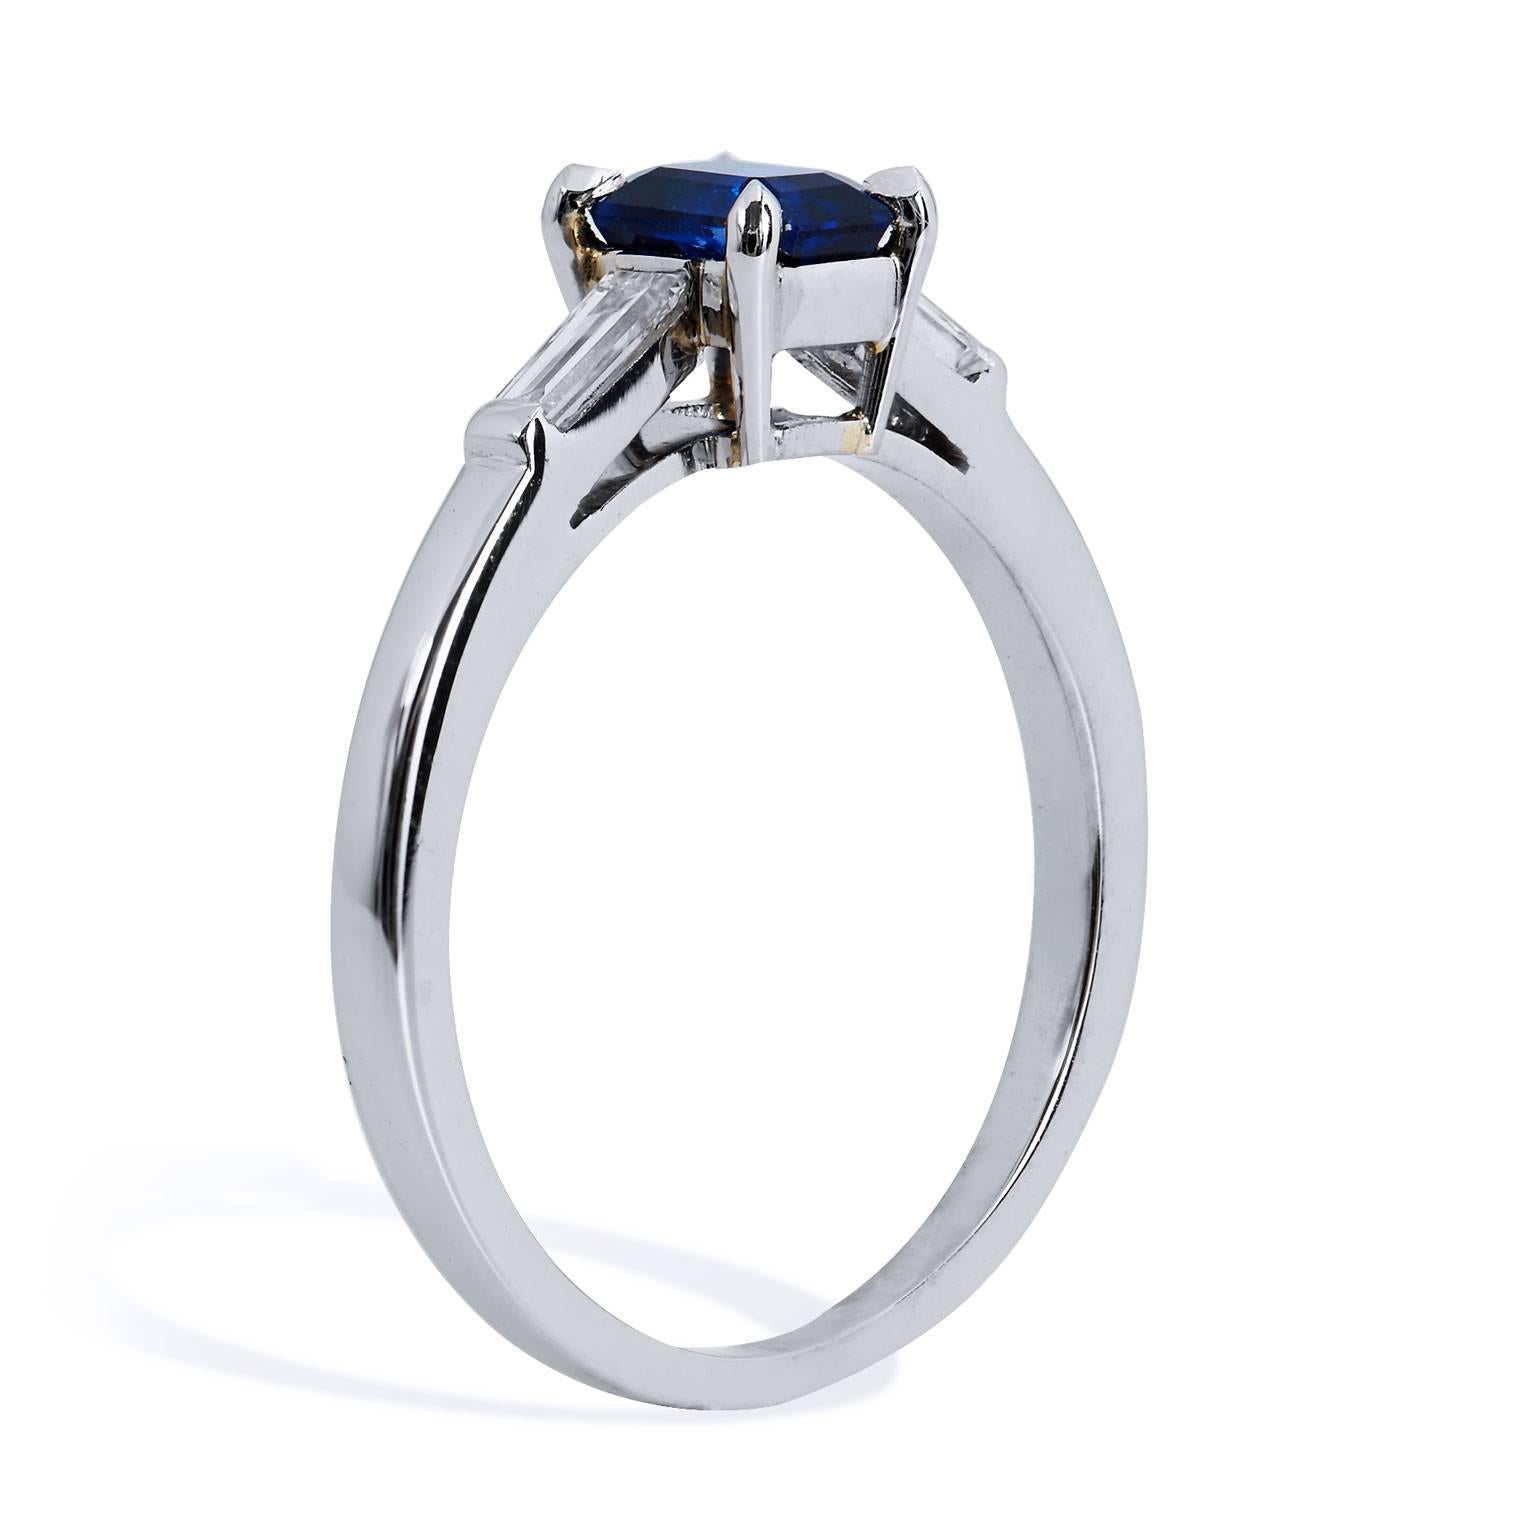 Bold, yet refined- a 0.73 carat emerald cut royal blue sapphire is set at center in this handmade platinum ring. Accompanied by two straight baguette cut diamonds, with a total weight of 0.18 carat (G/H/VS), on each side this ring is simplistic and